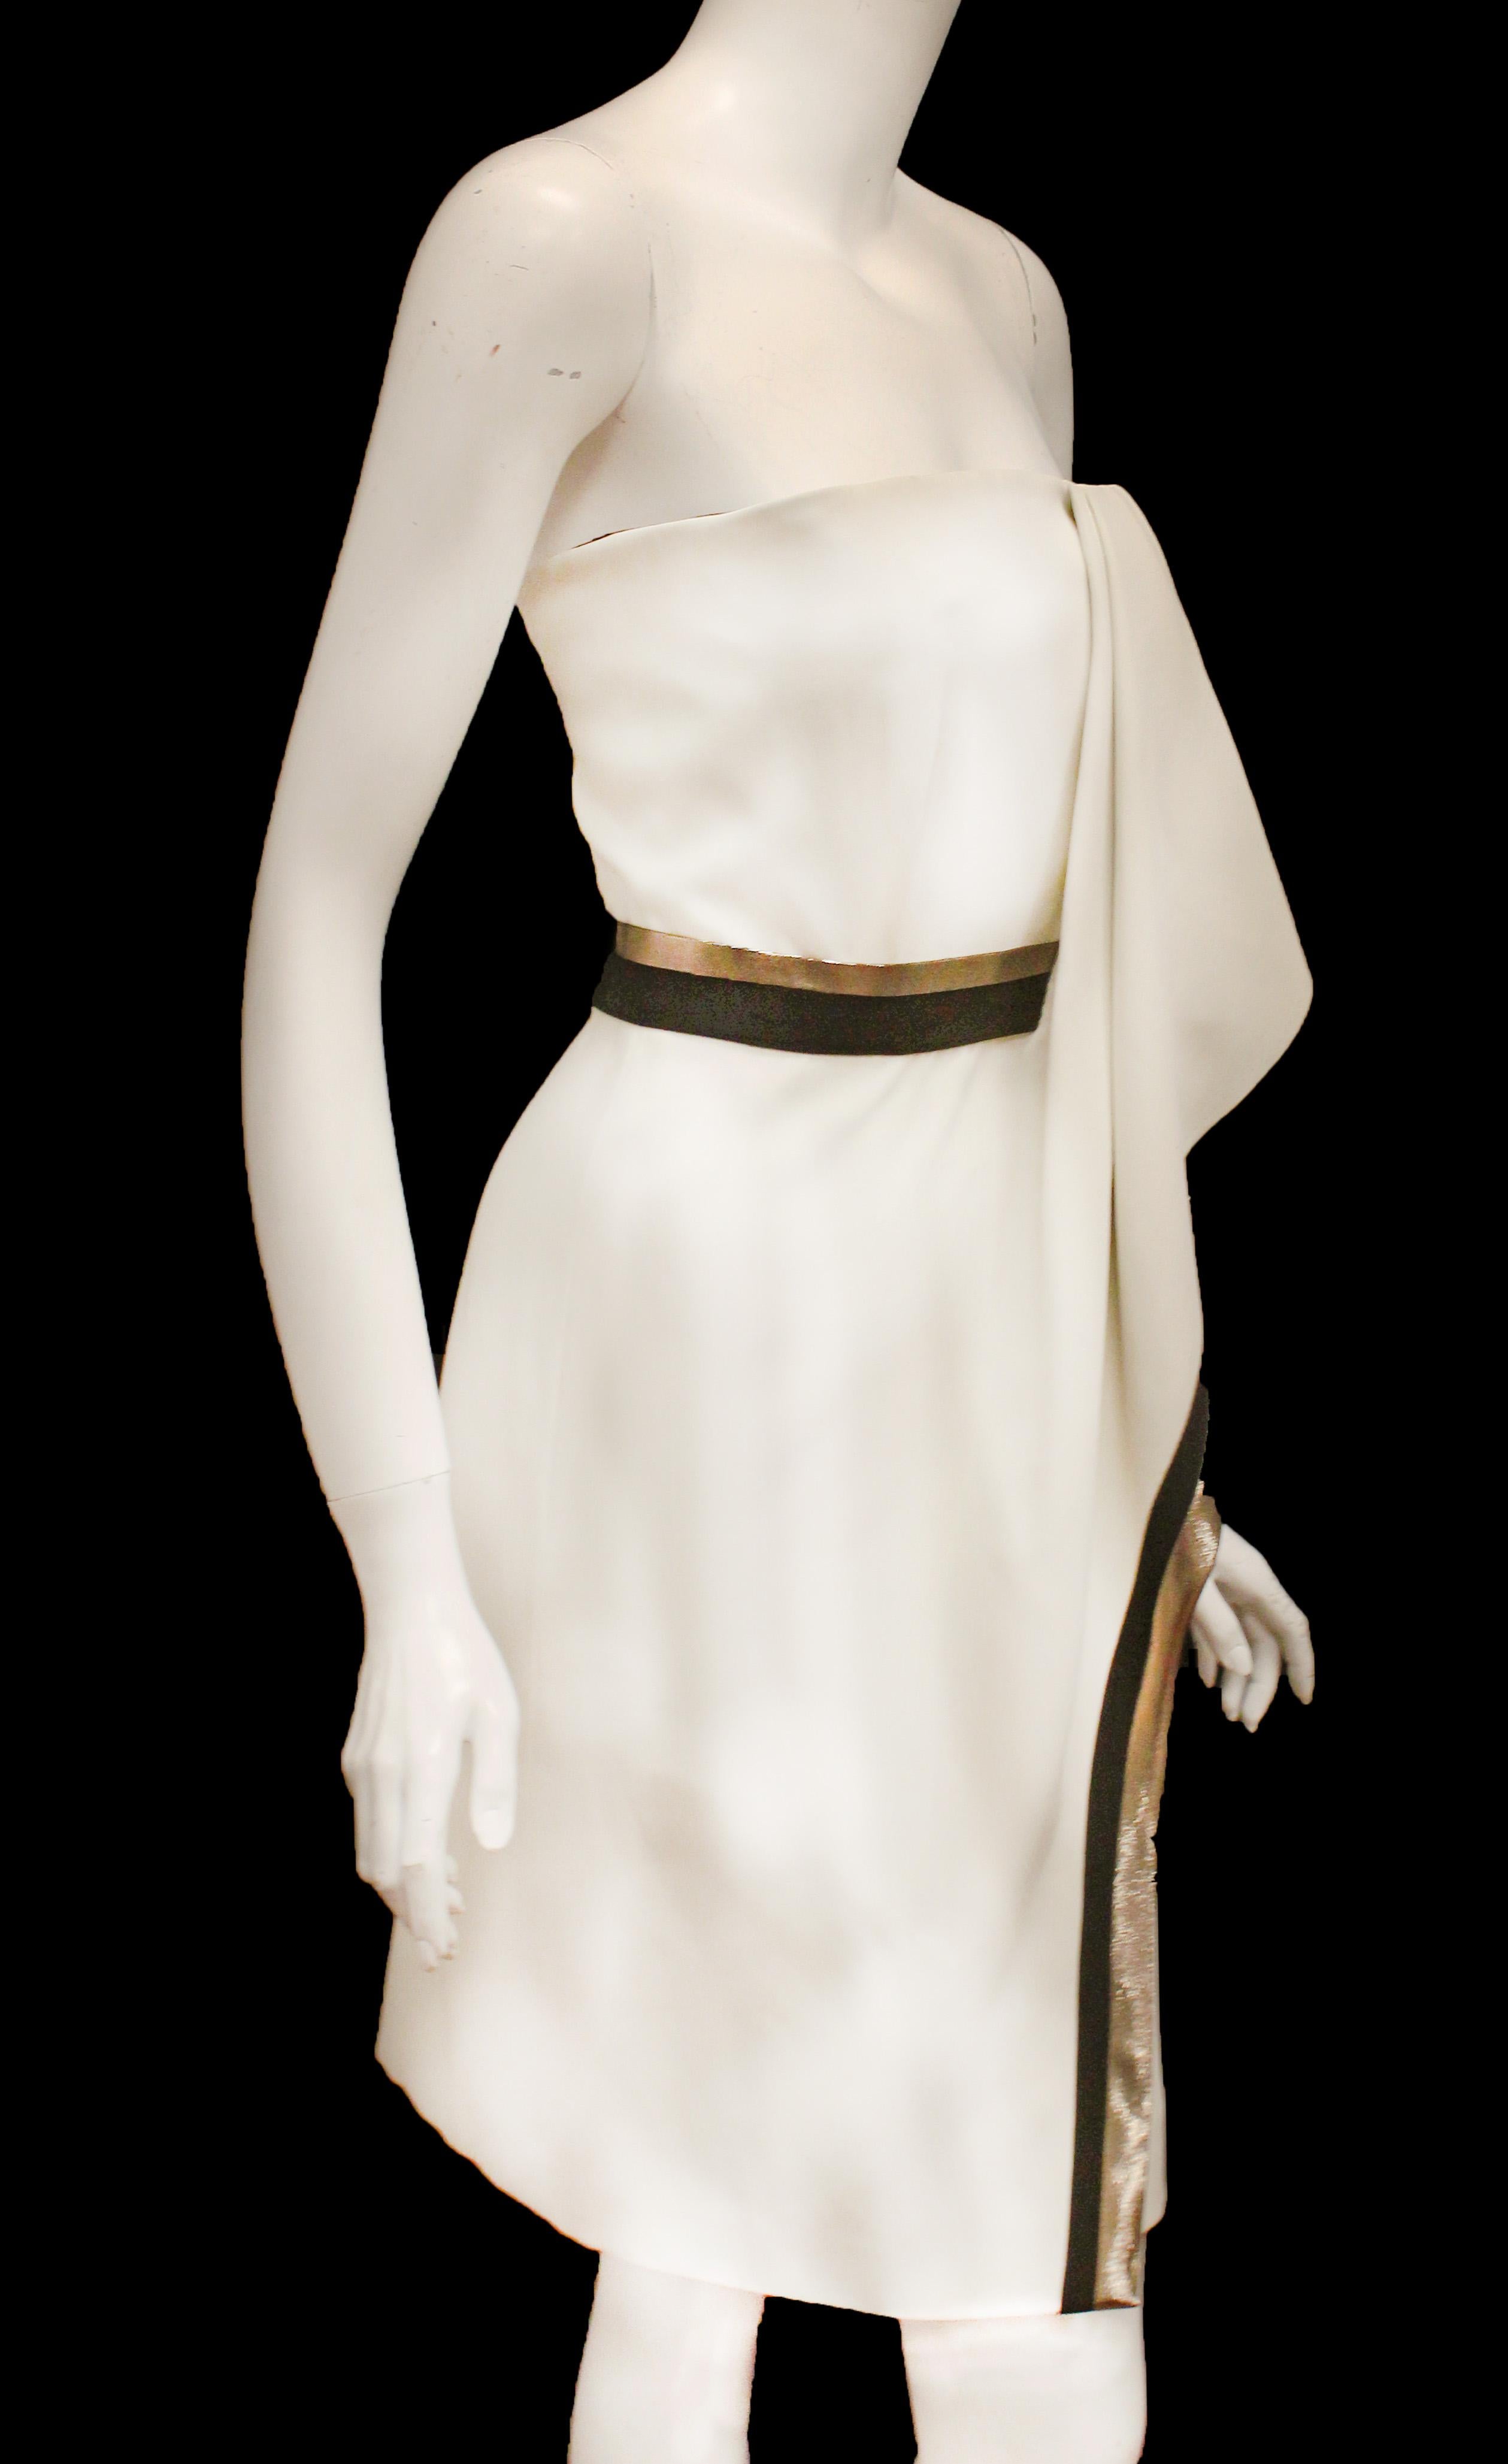 J. Mendel ivory strapless silk dress is  trimmed at waist and, also, down the draped detail at front in black and metallic gold tone strips.  The hemline is asymmetrical with the draped detail falling lower than the rest of dress.  The bodice